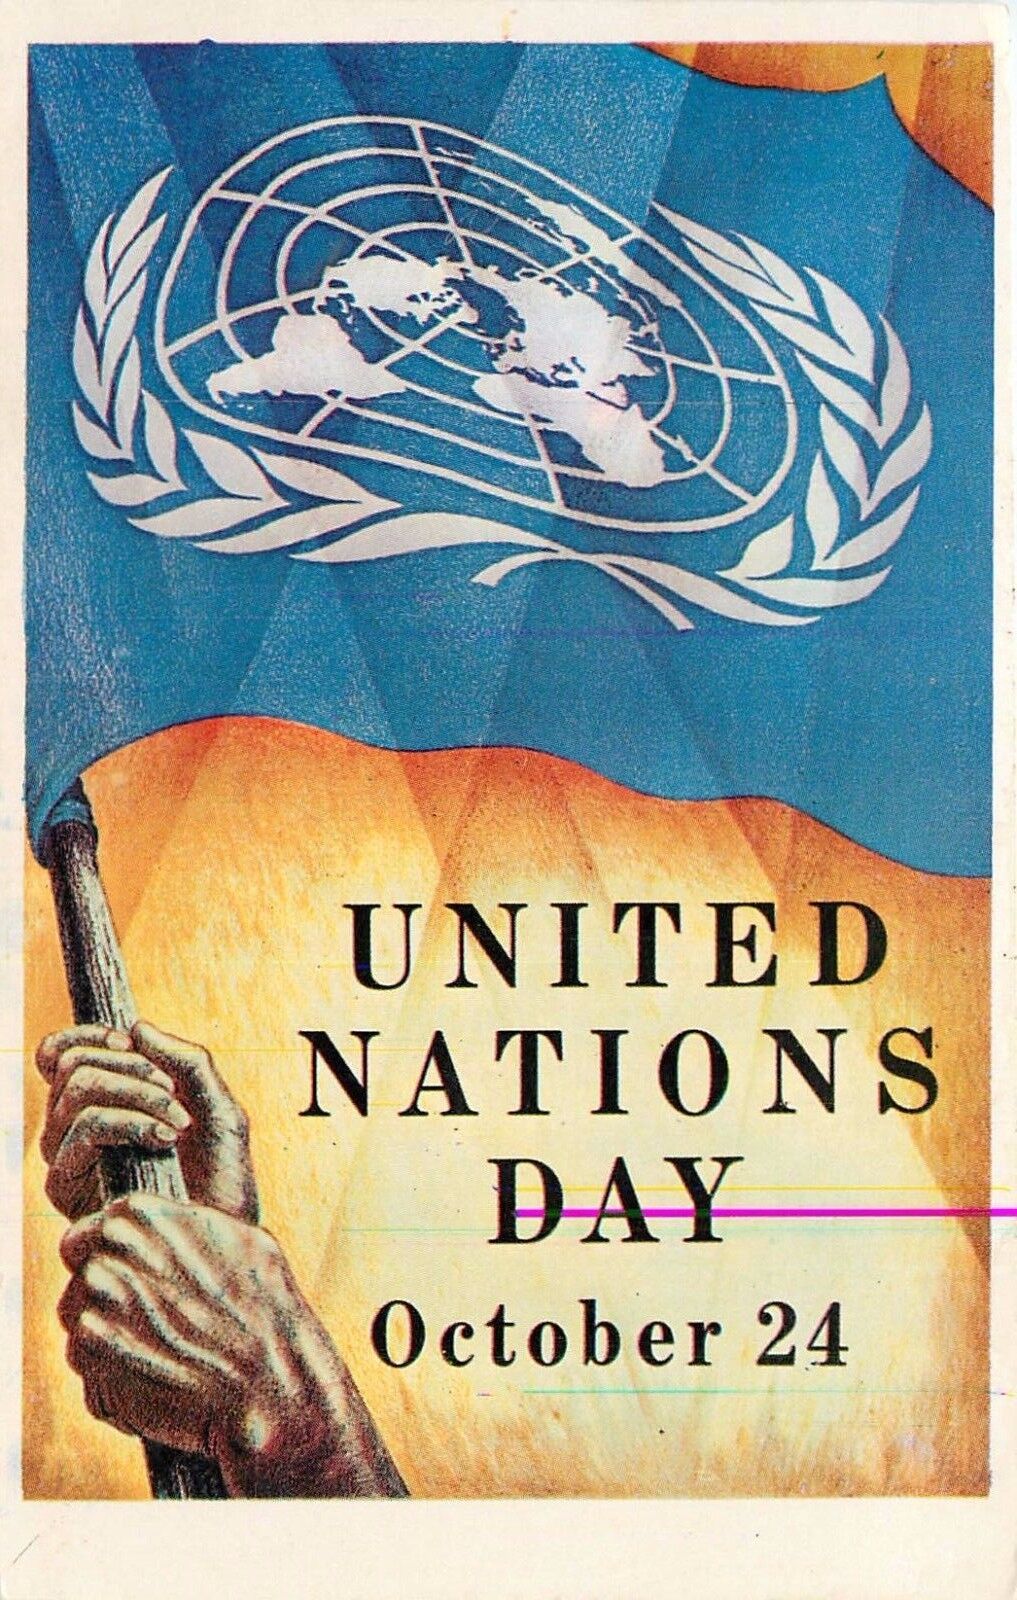 United Nations Day October 24 Postcard  1953 Poster